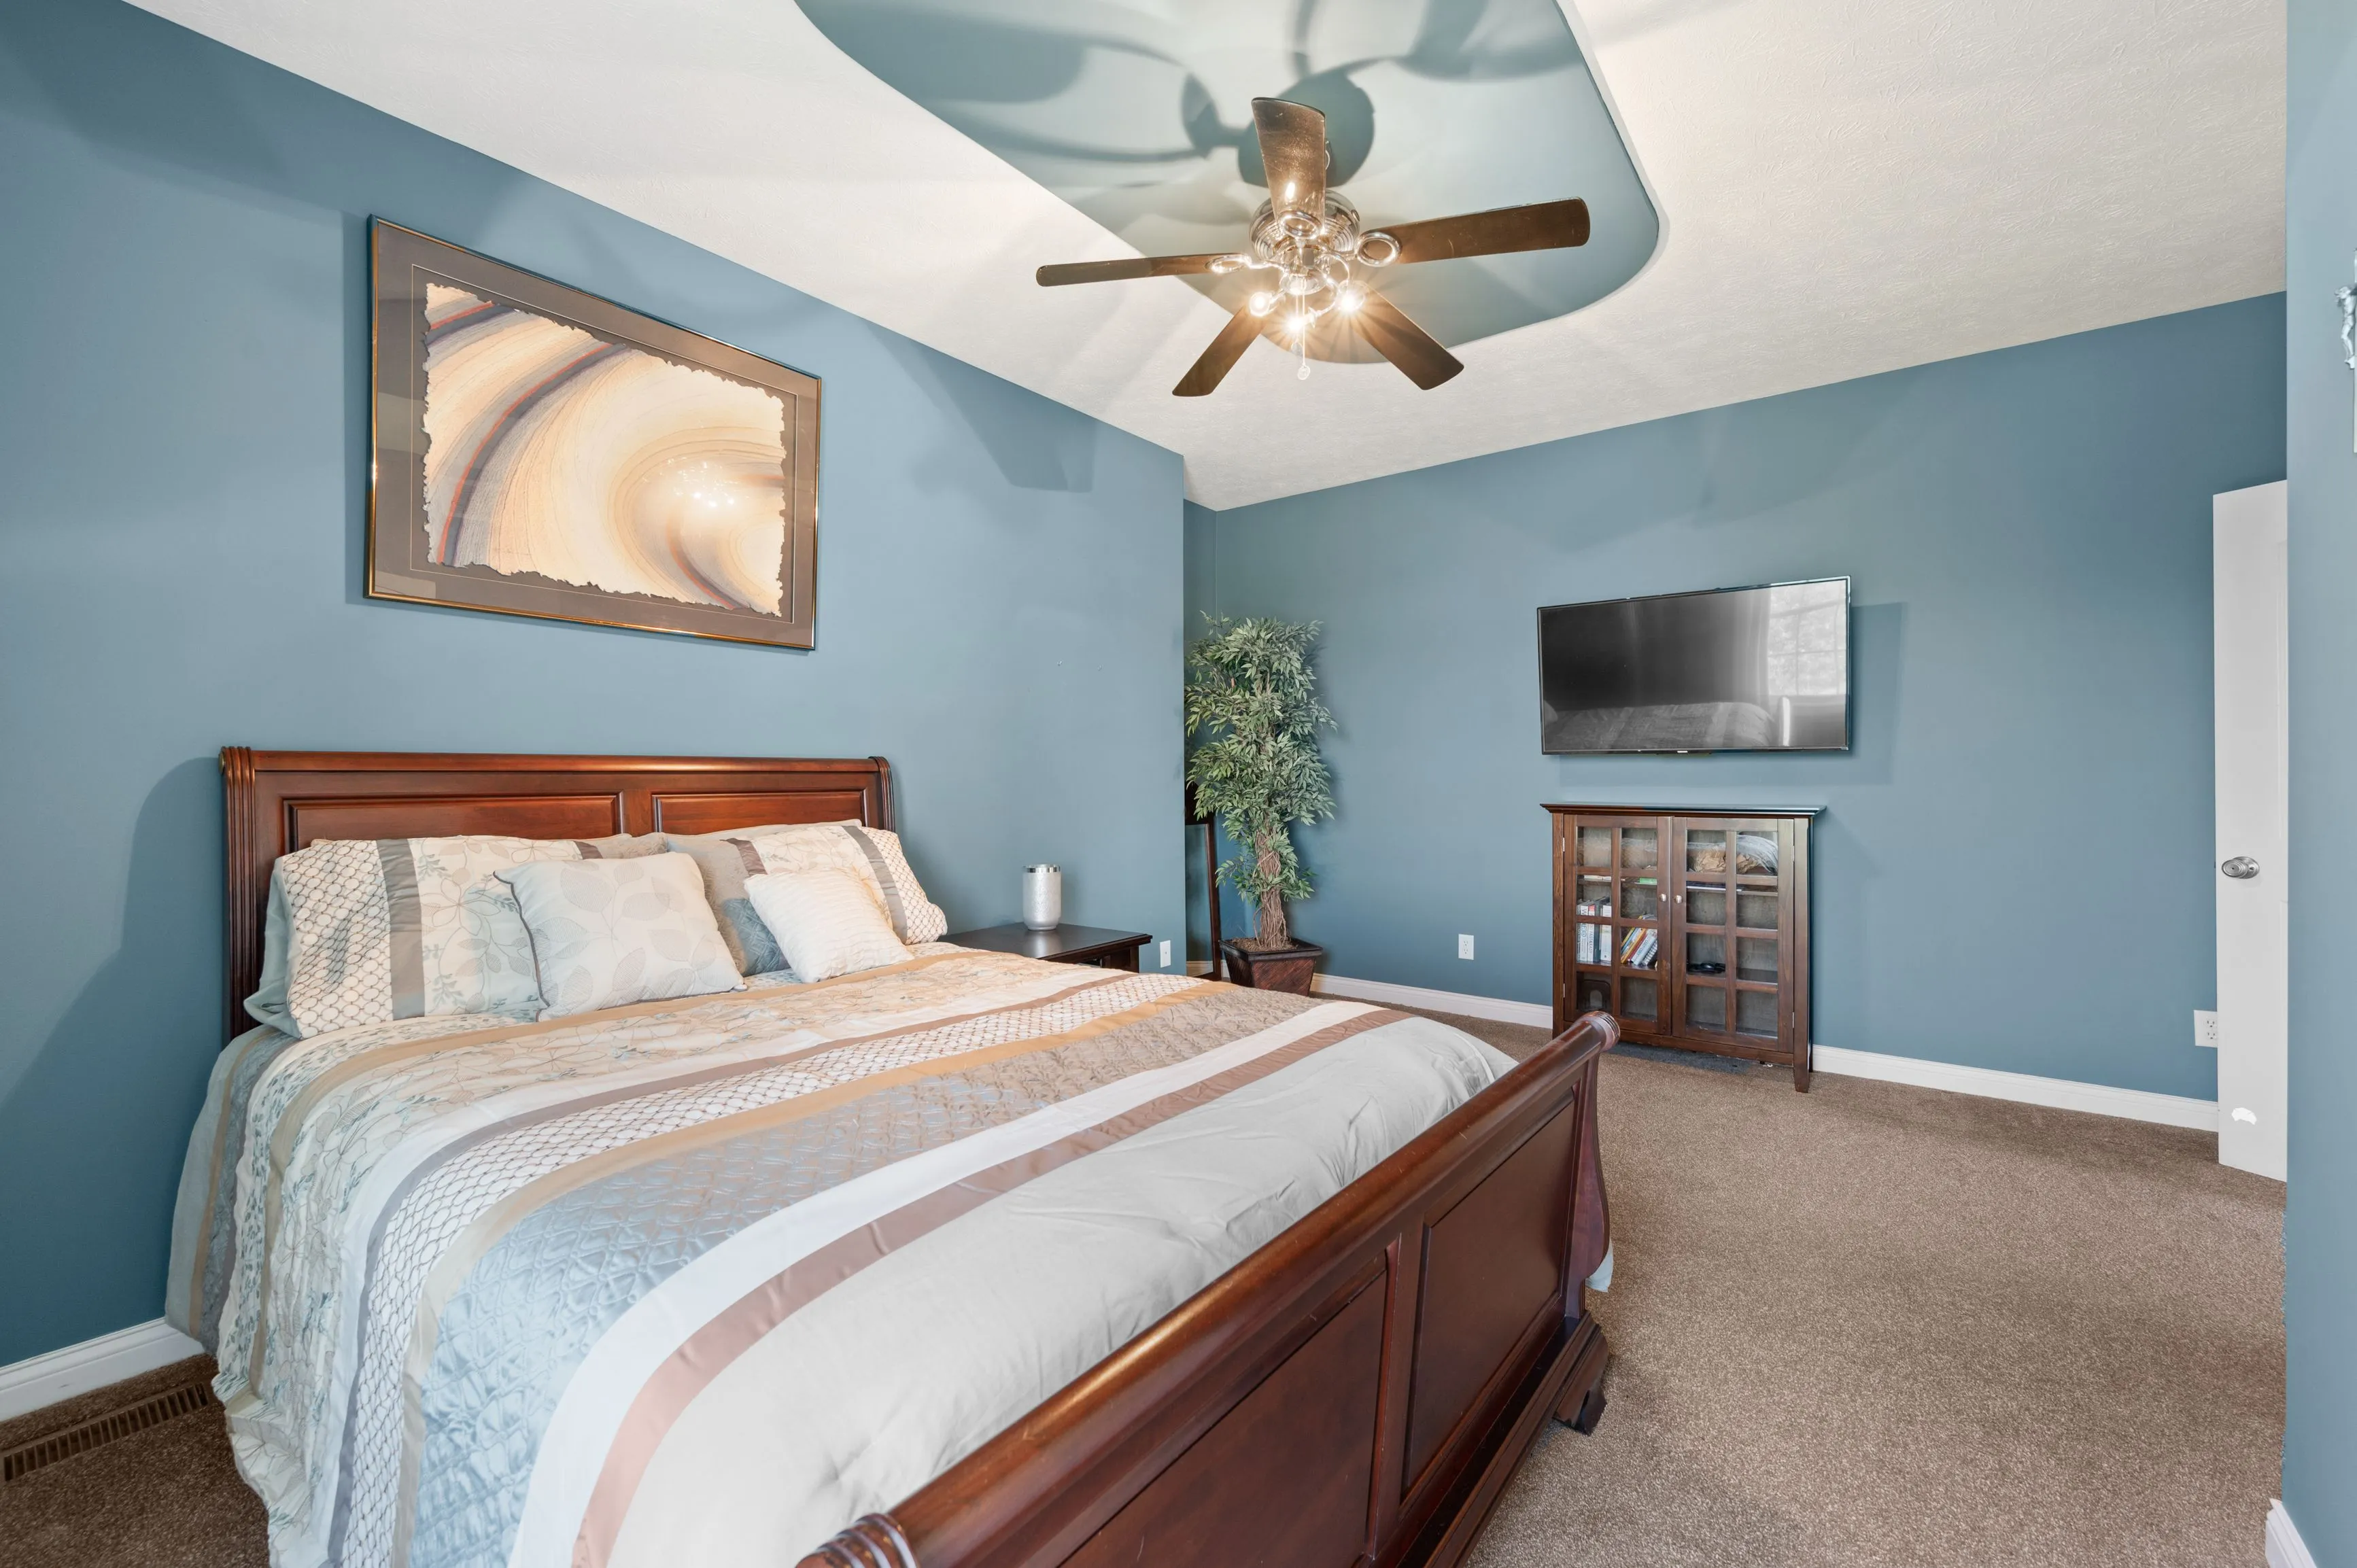 Elegantly furnished bedroom with a queen-sized bed, blue walls, ceiling fan, and a flat-screen TV.